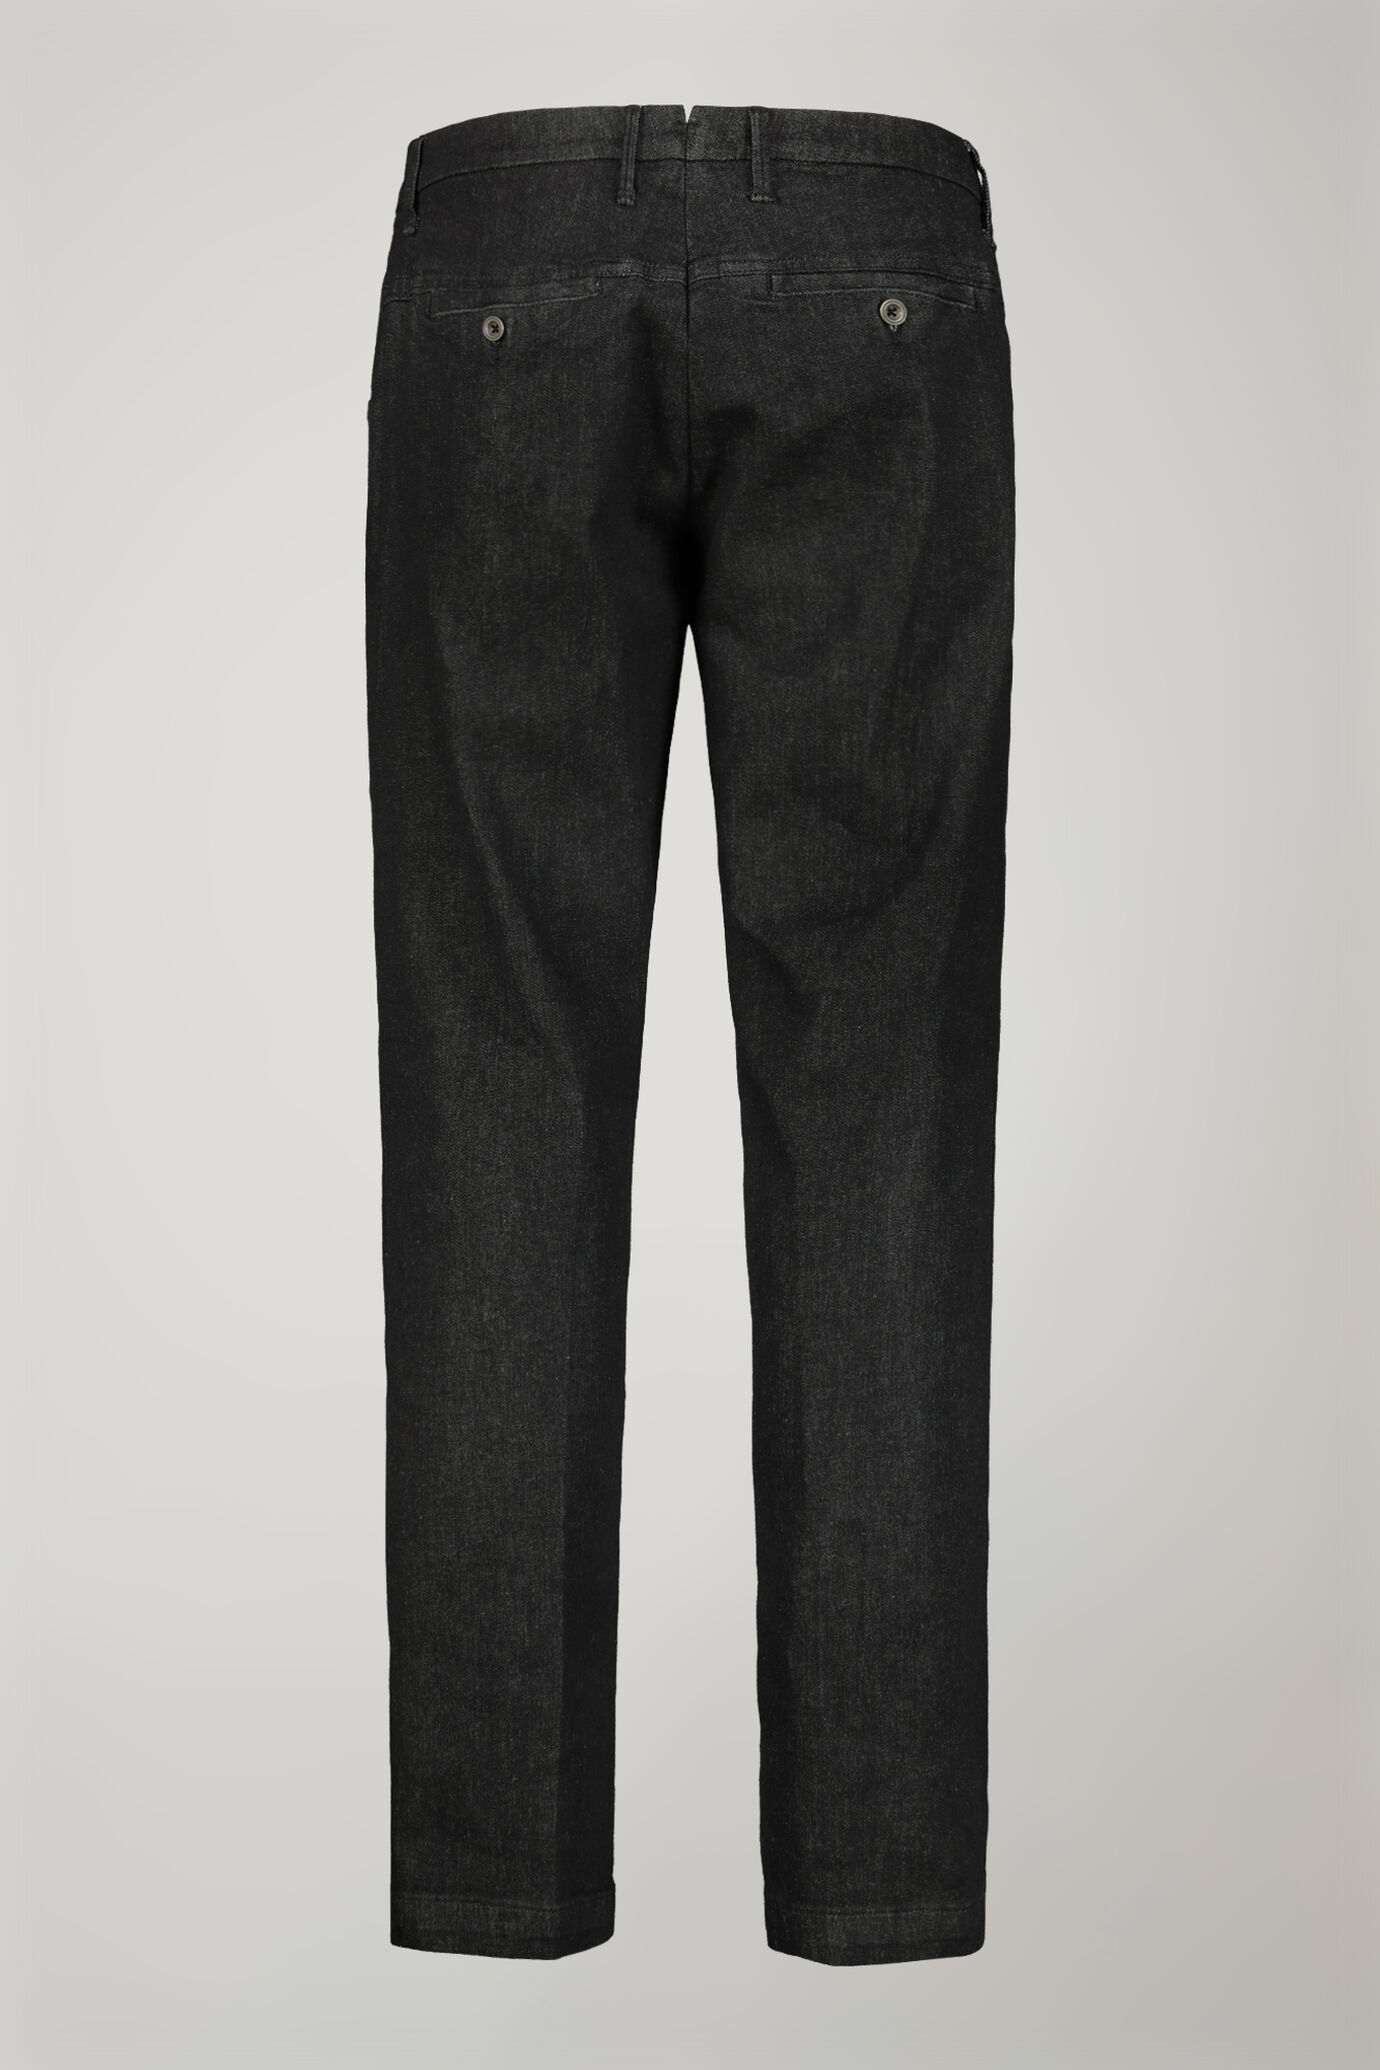 Men's trousers with small dart regular fit denim fabric image number 5